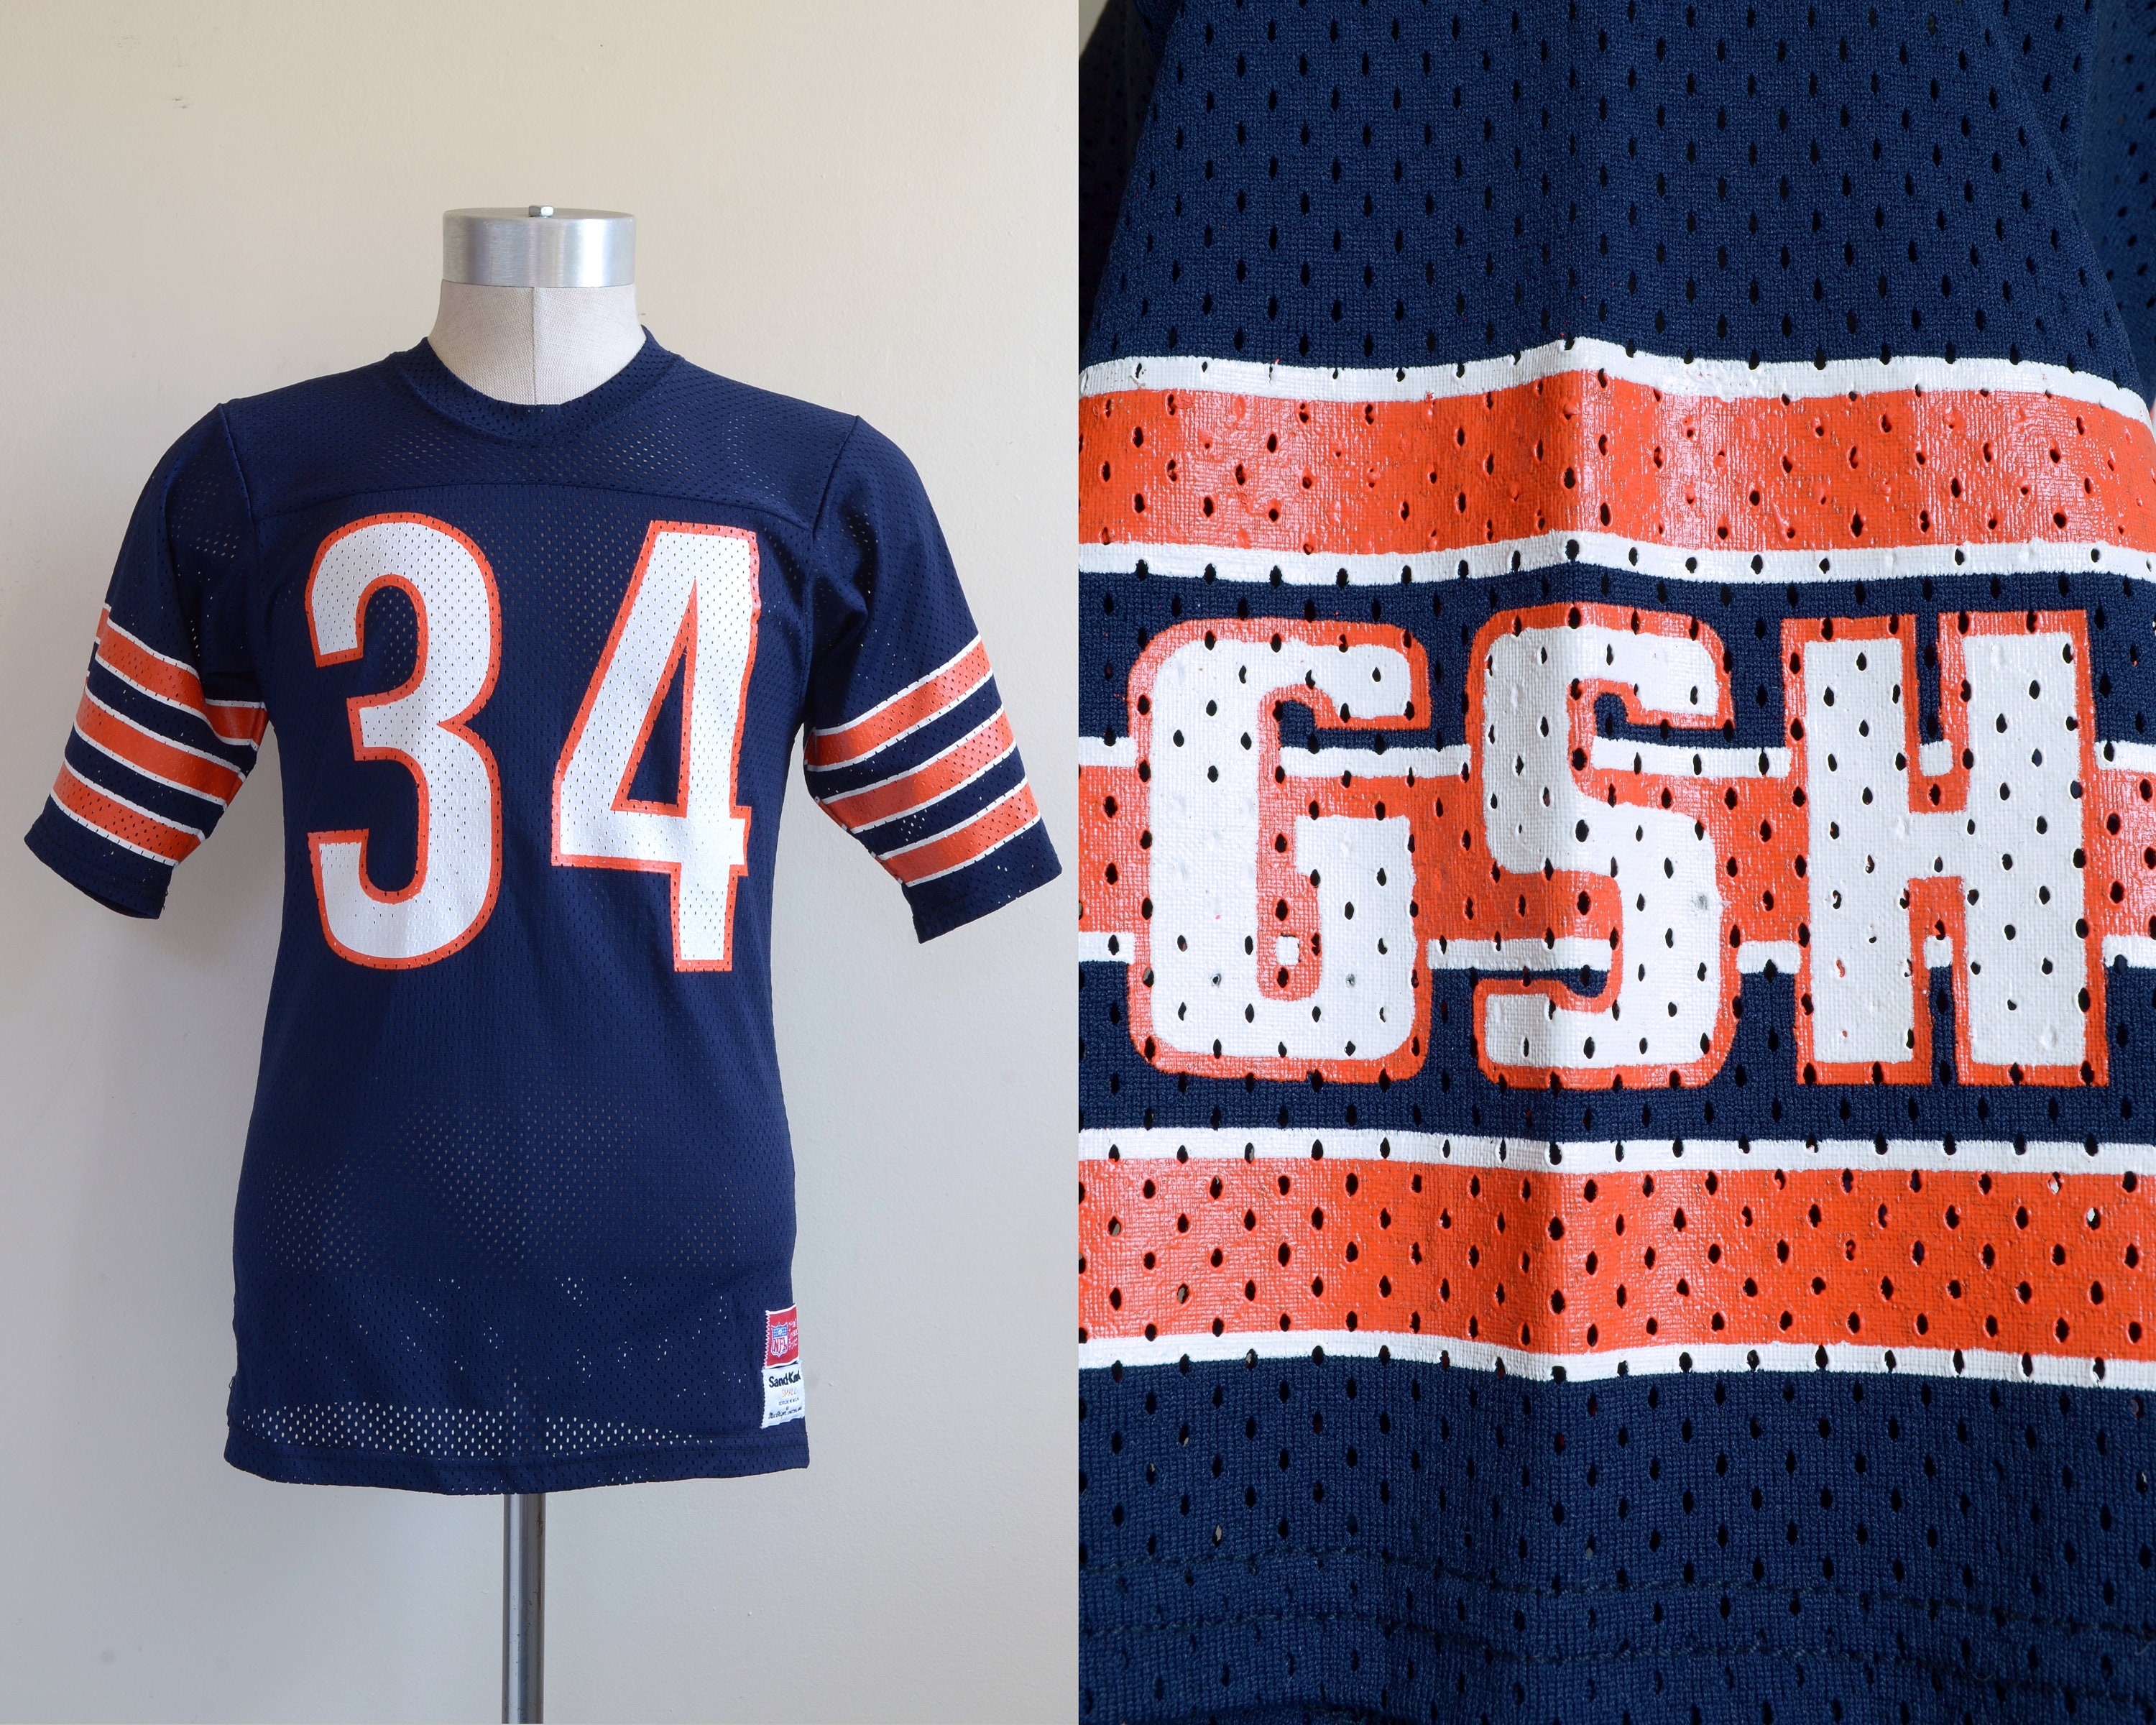 thisNthat63 Walter Payton Chicago Bears Throwback Jersey